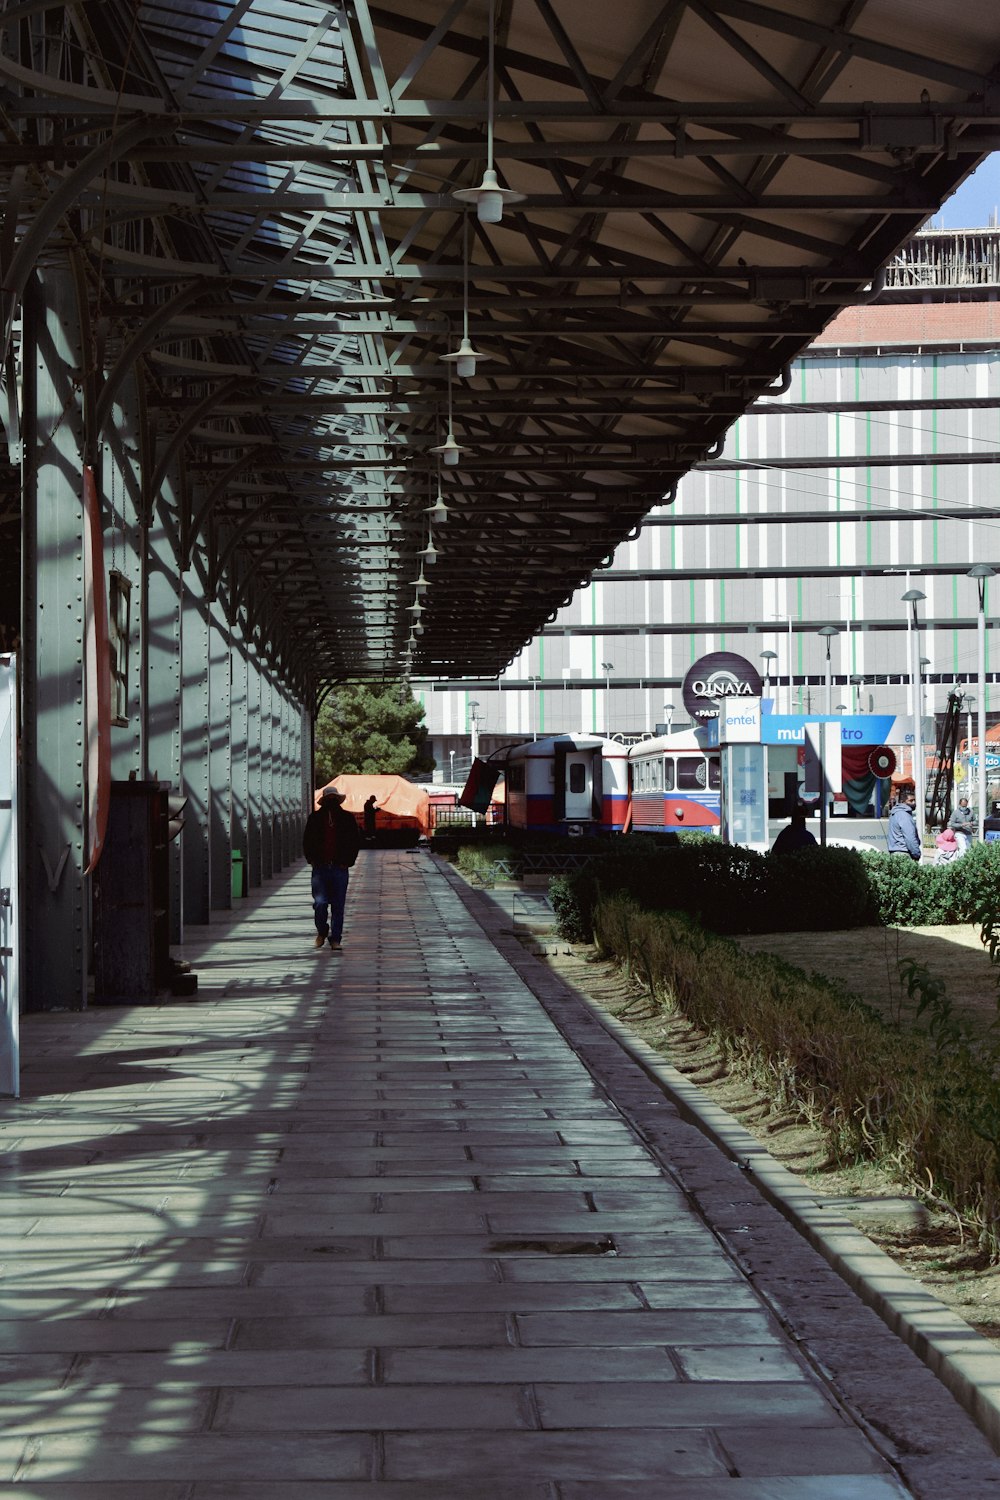 a person walking down a walkway under a building